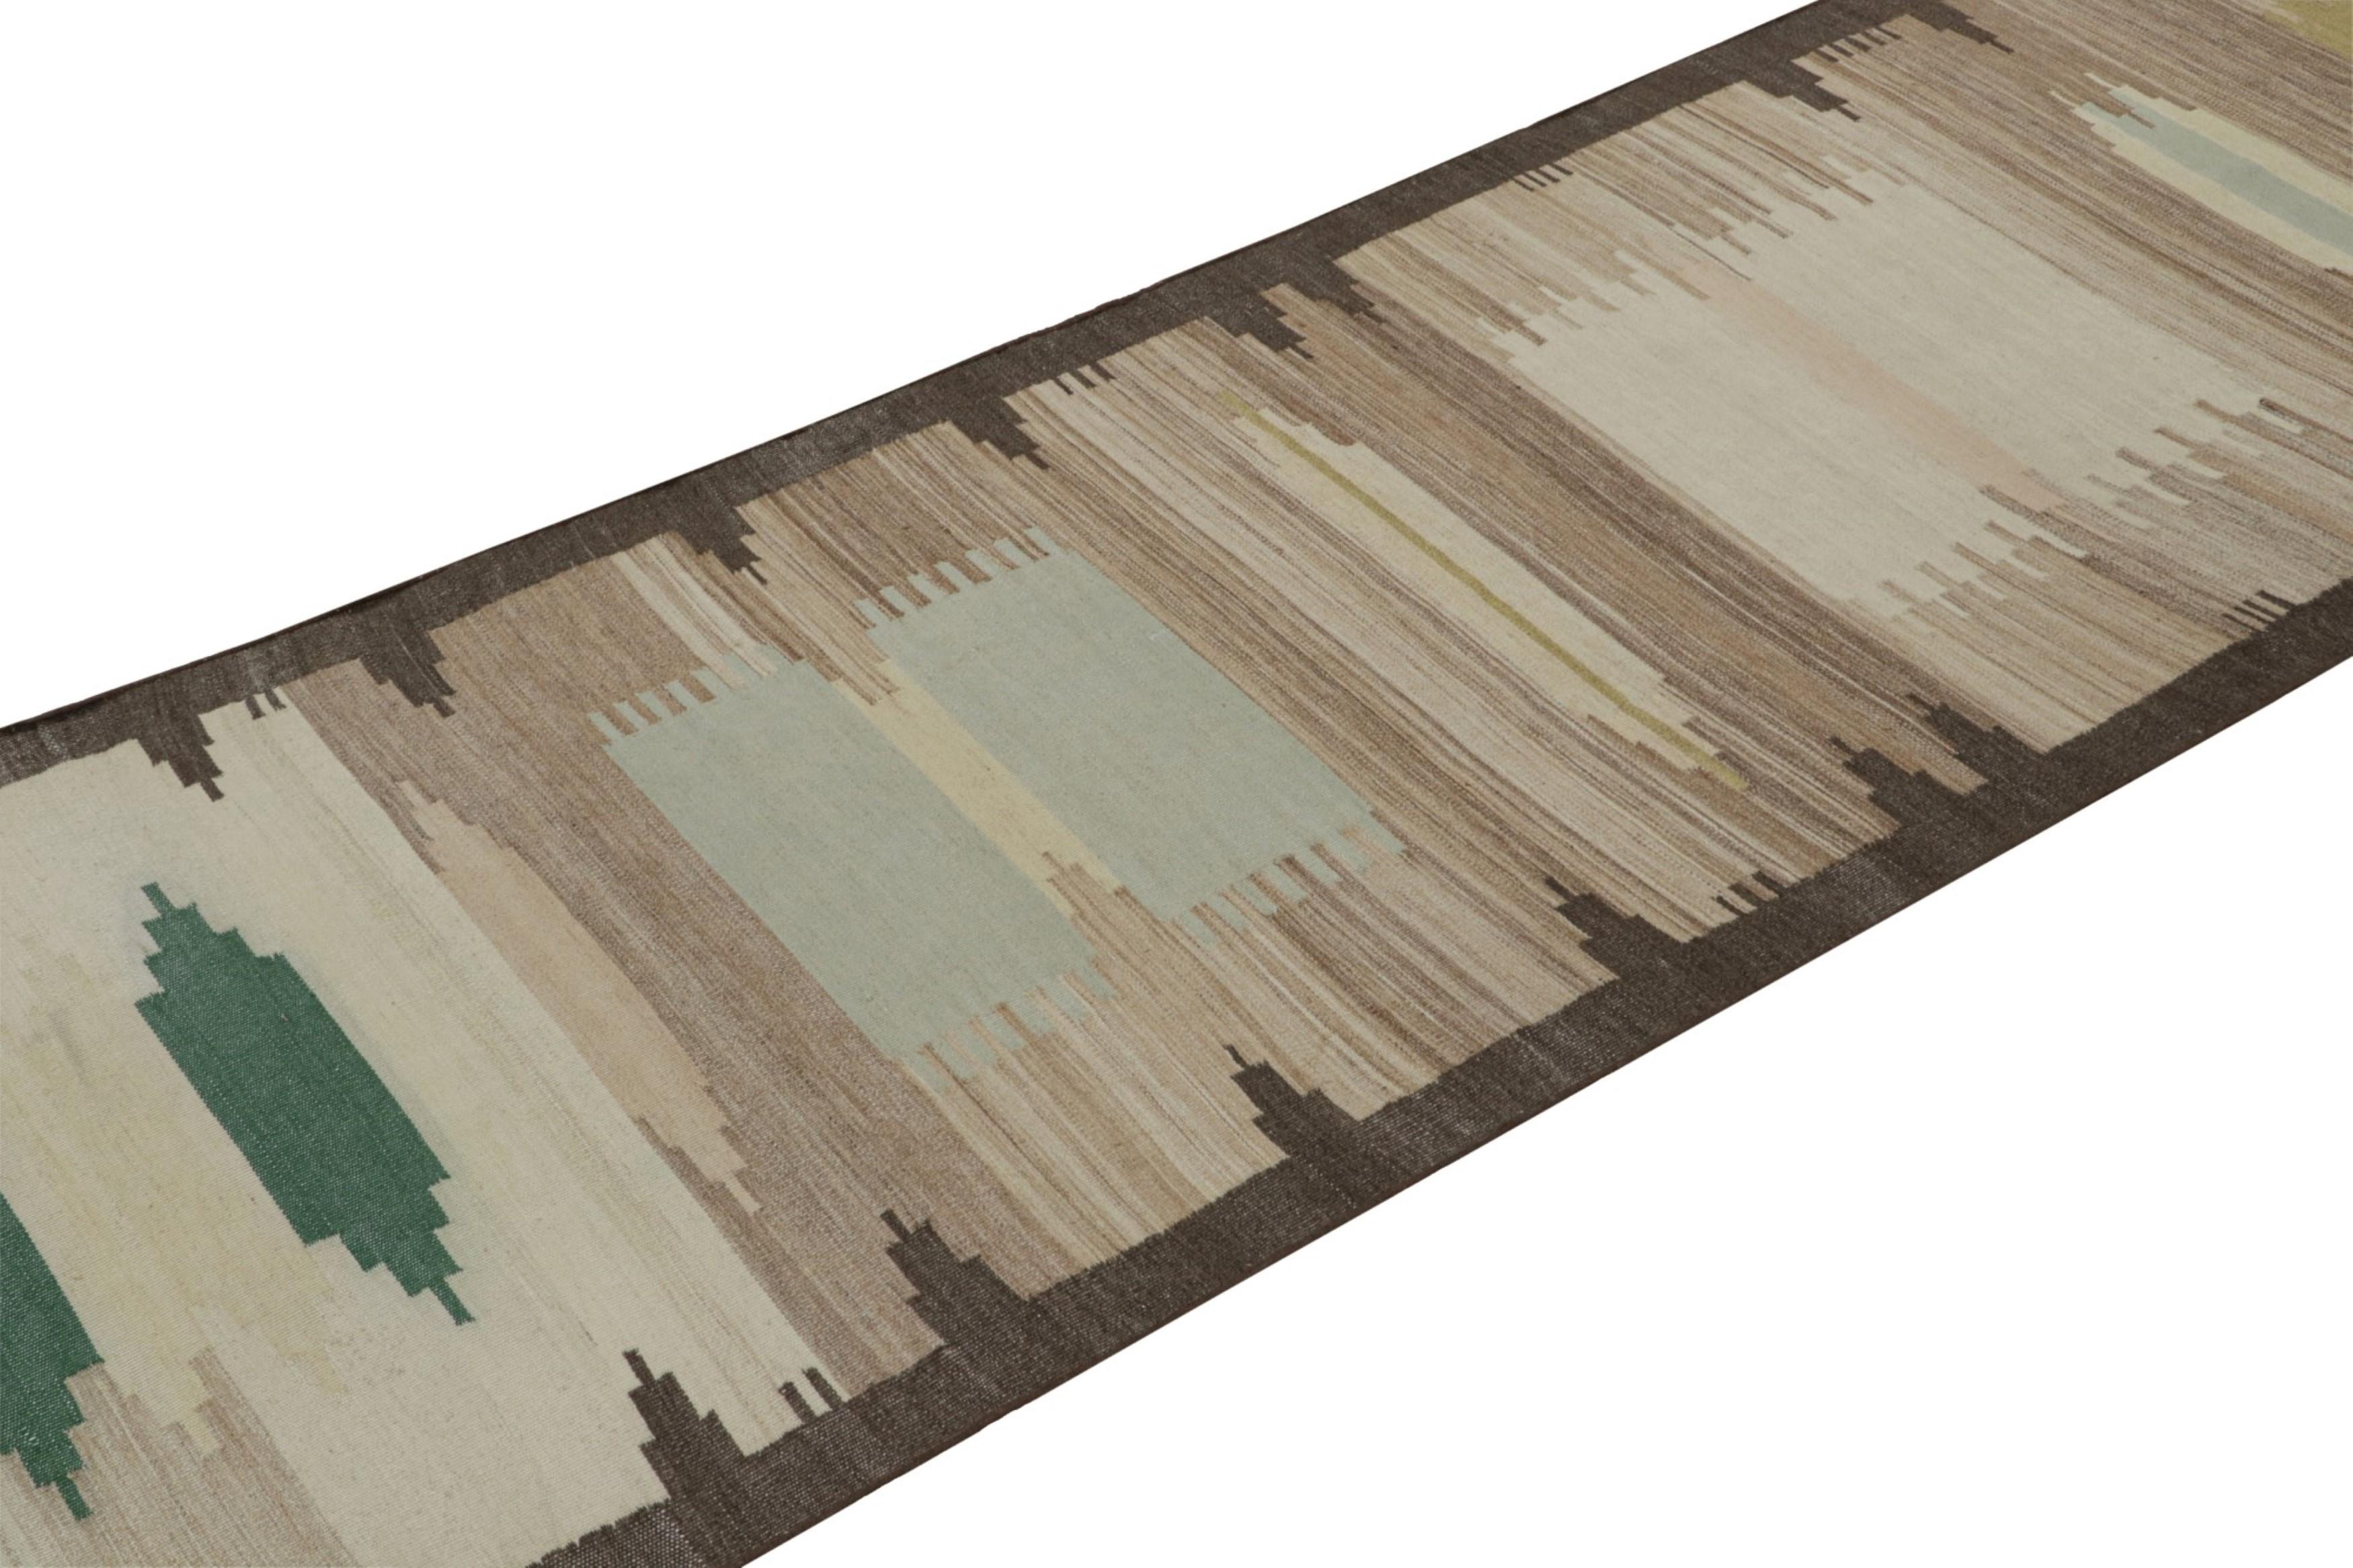 Hand-Woven Vintage Tribal Kilim runner rug in Brown and Blue Patterns by Rug & Kilim For Sale